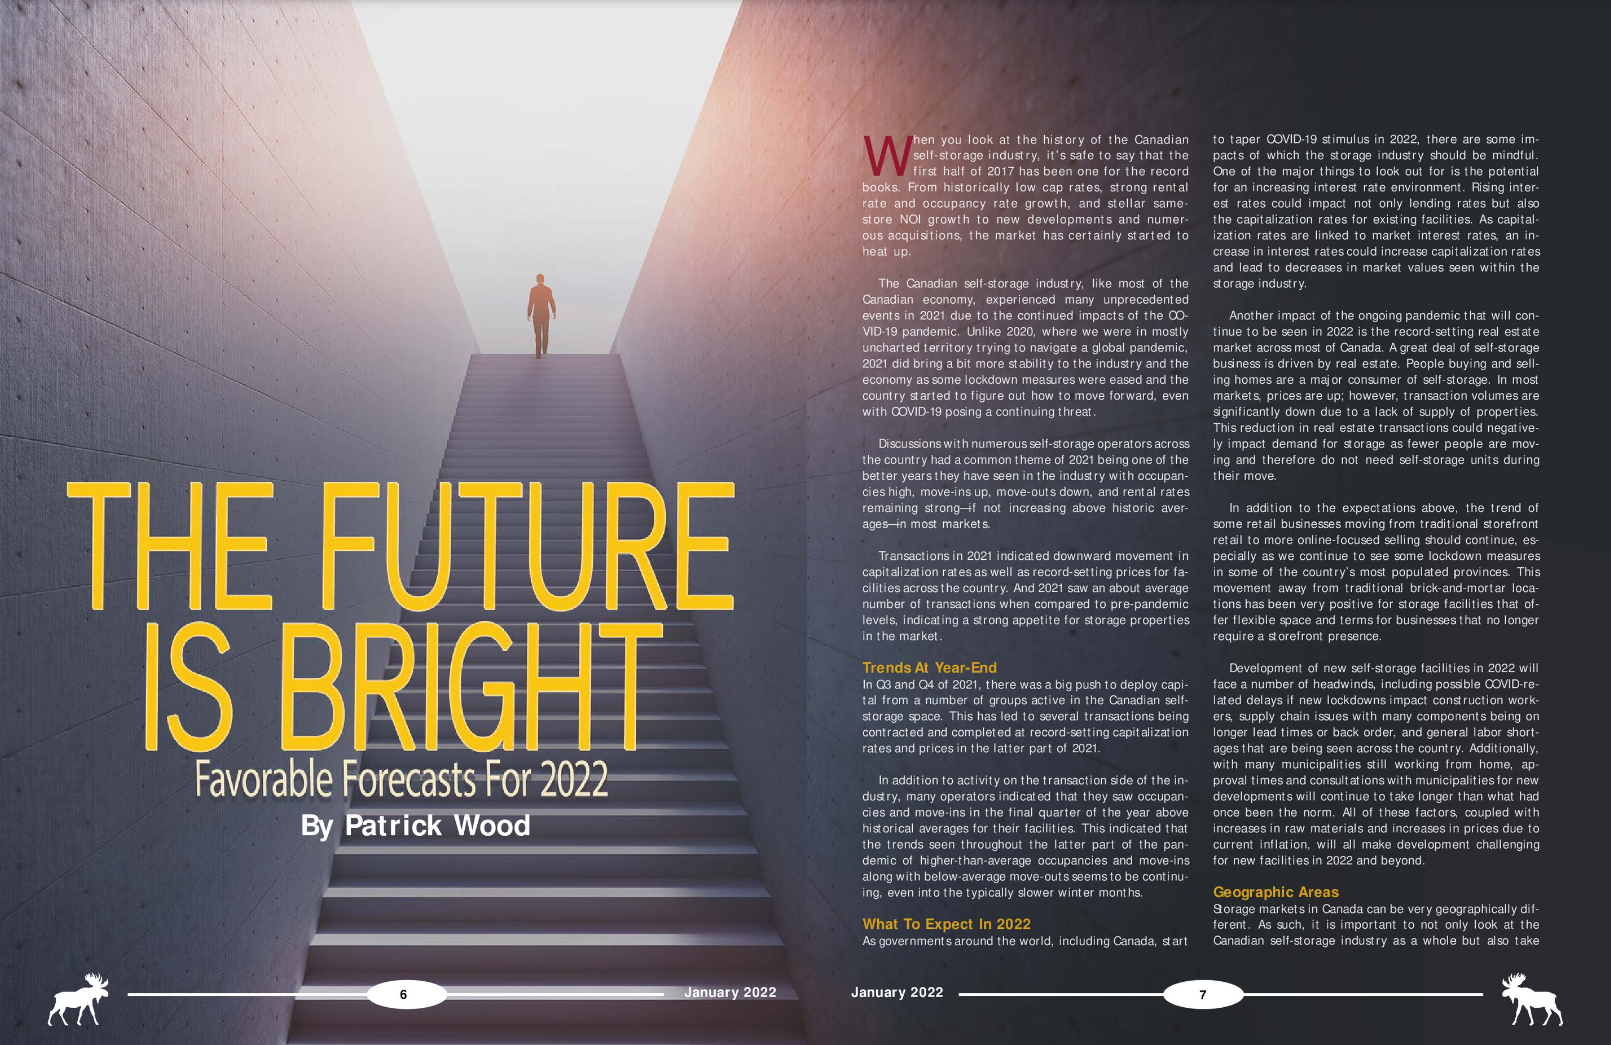 'The Future is Bright: Favorable Forecasts for 2022' by Patrick Wood for Self-Storage Canada